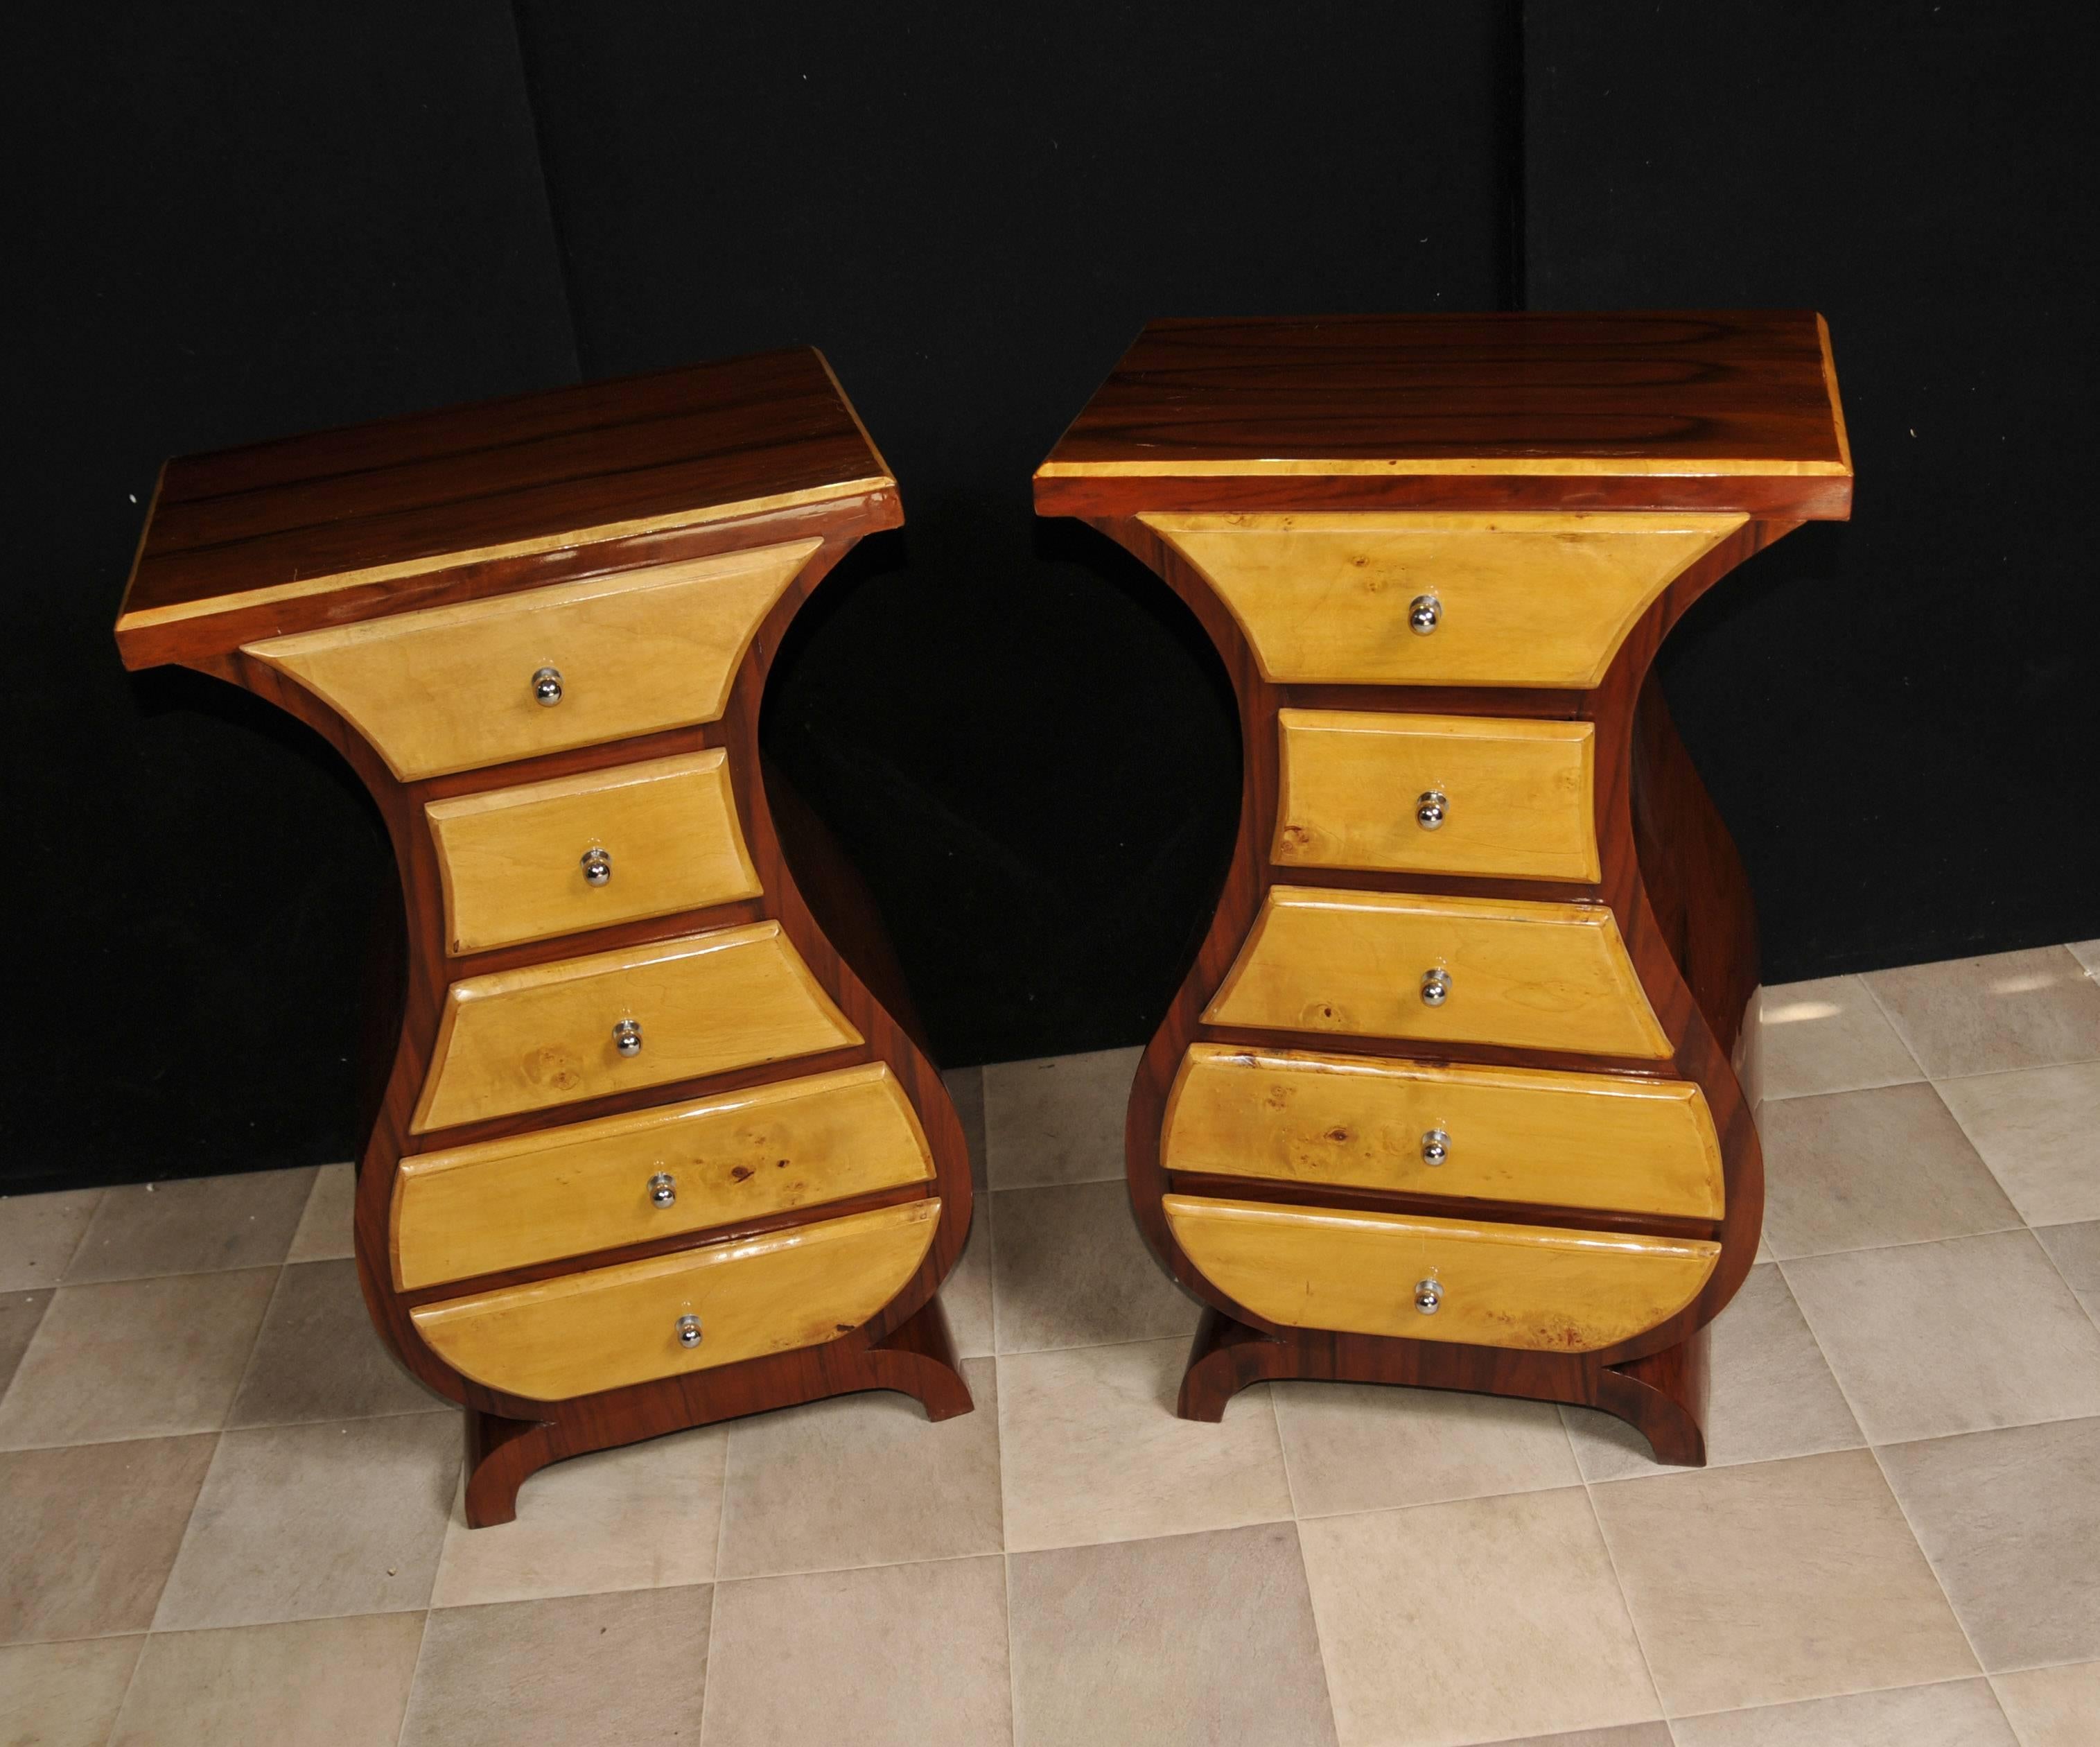 Contemporary Pair of Art Deco Style Bedside Chests/ Nightstands Modernist Furniture For Sale